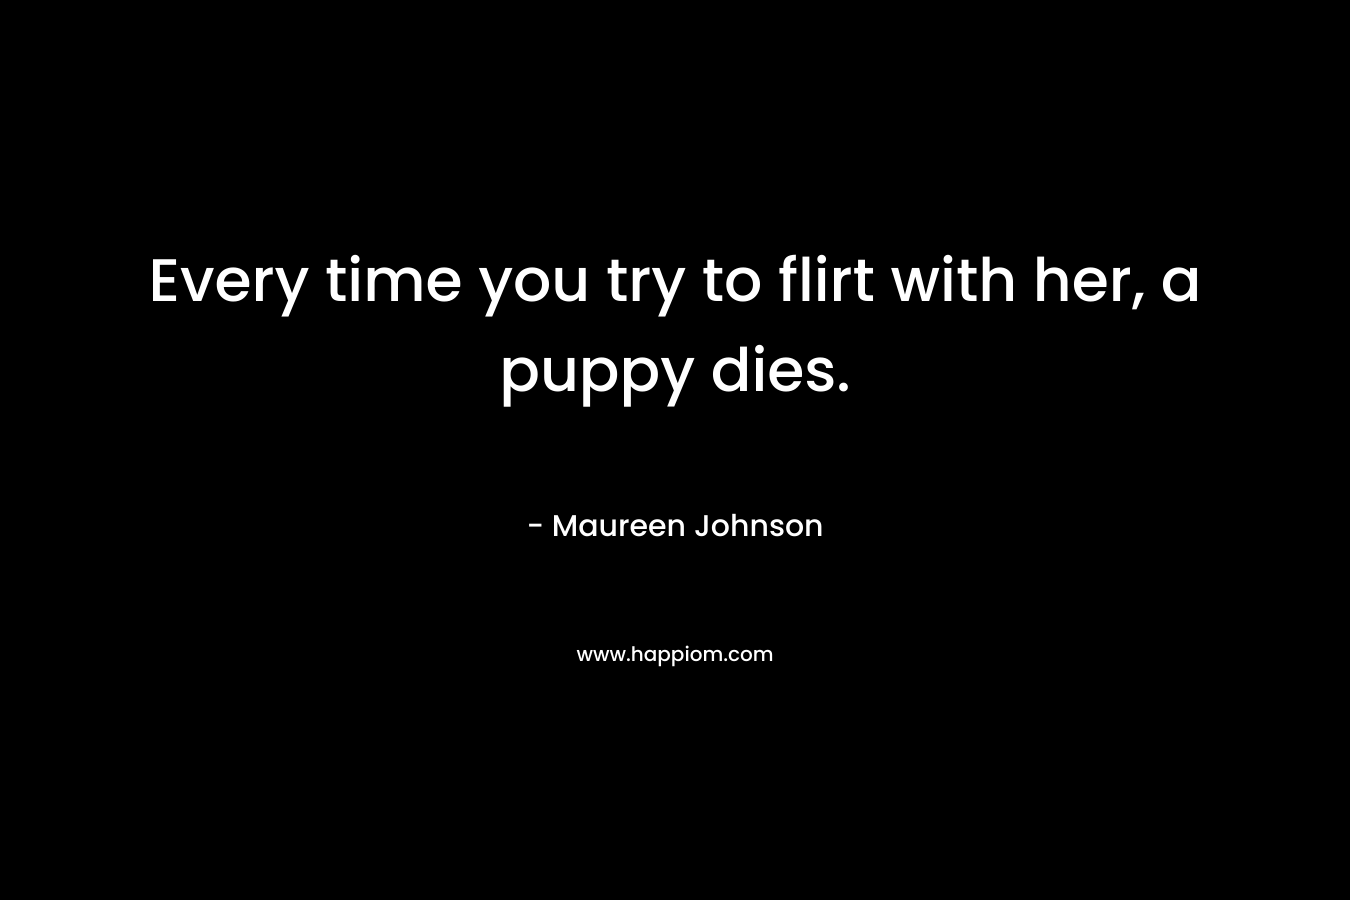 Every time you try to flirt with her, a puppy dies.